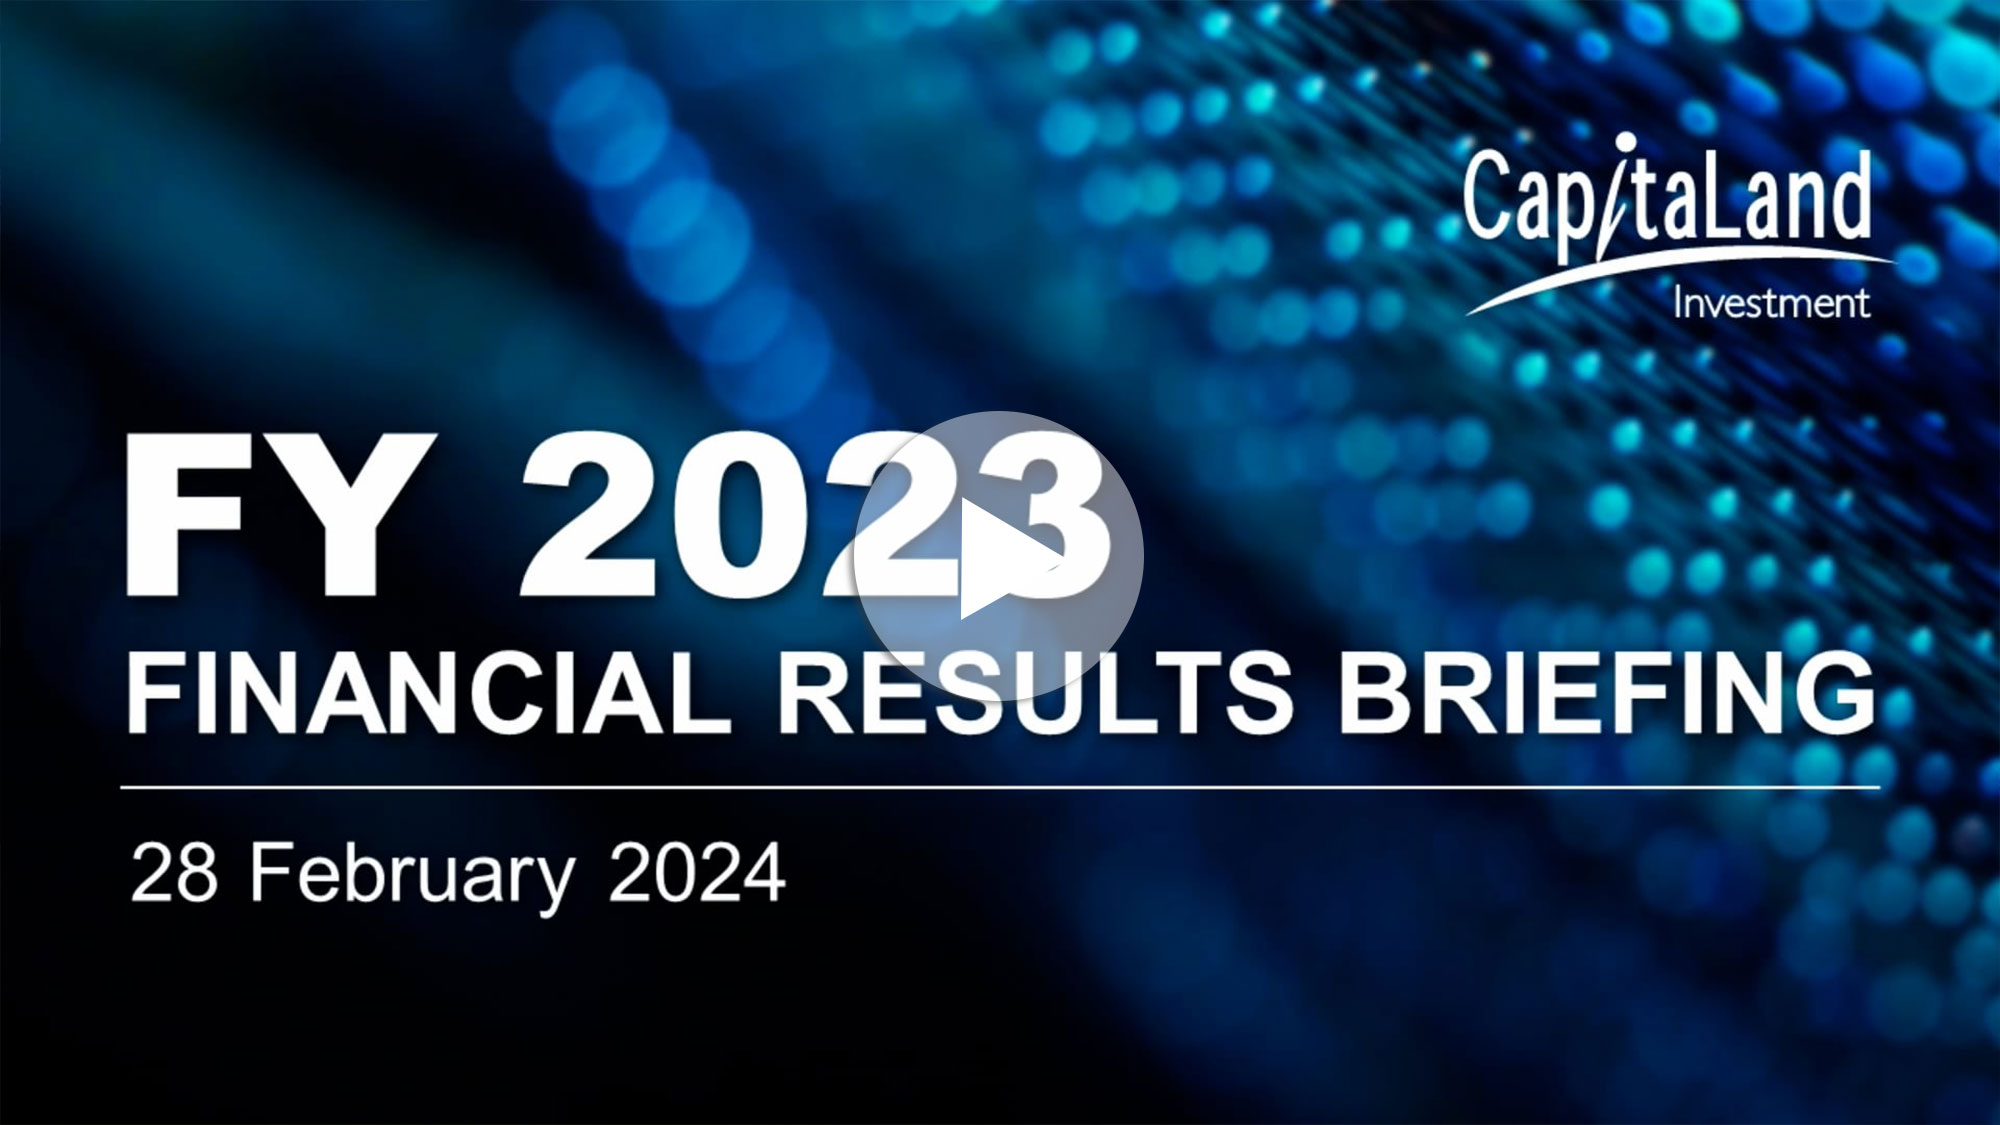 FY 2023 Financial Results Briefing